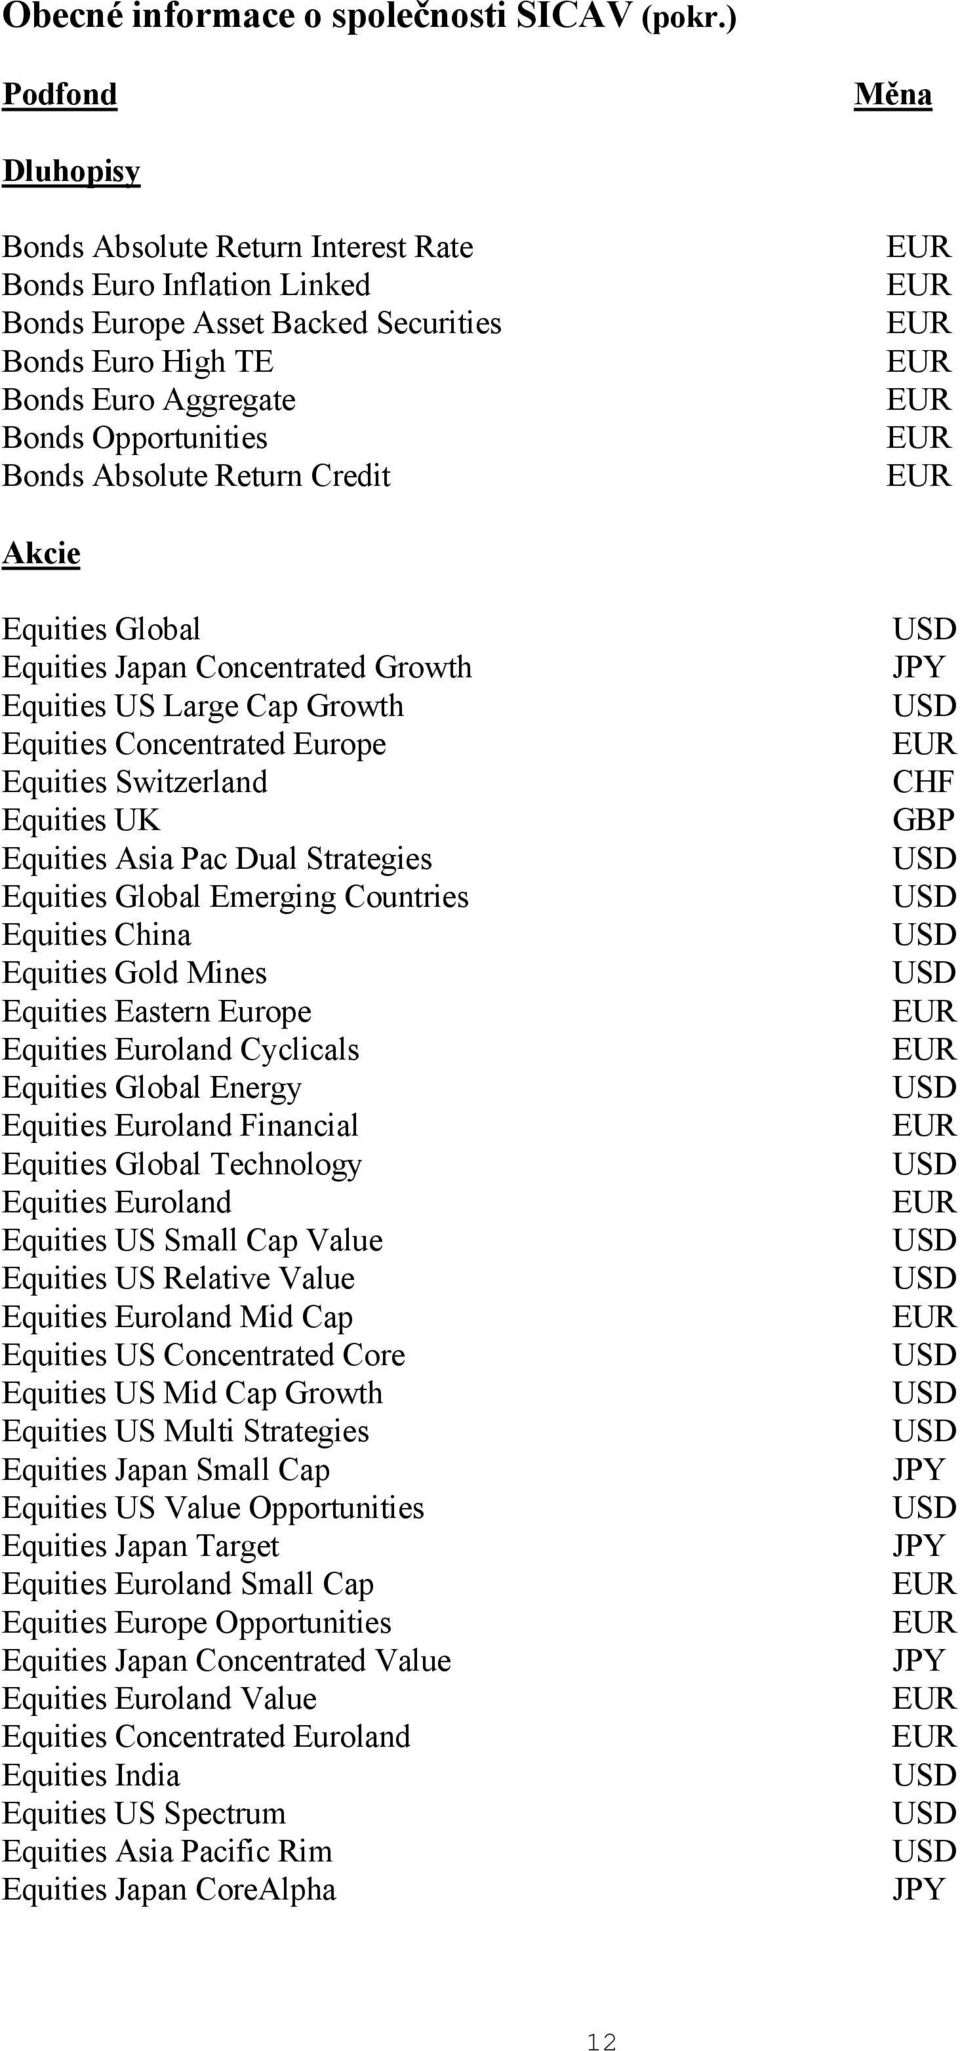 Absolute Return Credit Akcie Equities Global Equities Japan Concentrated Growth Equities US Large Cap Growth Equities Concentrated Europe Equities Switzerland Equities UK Equities Asia Pac Dual